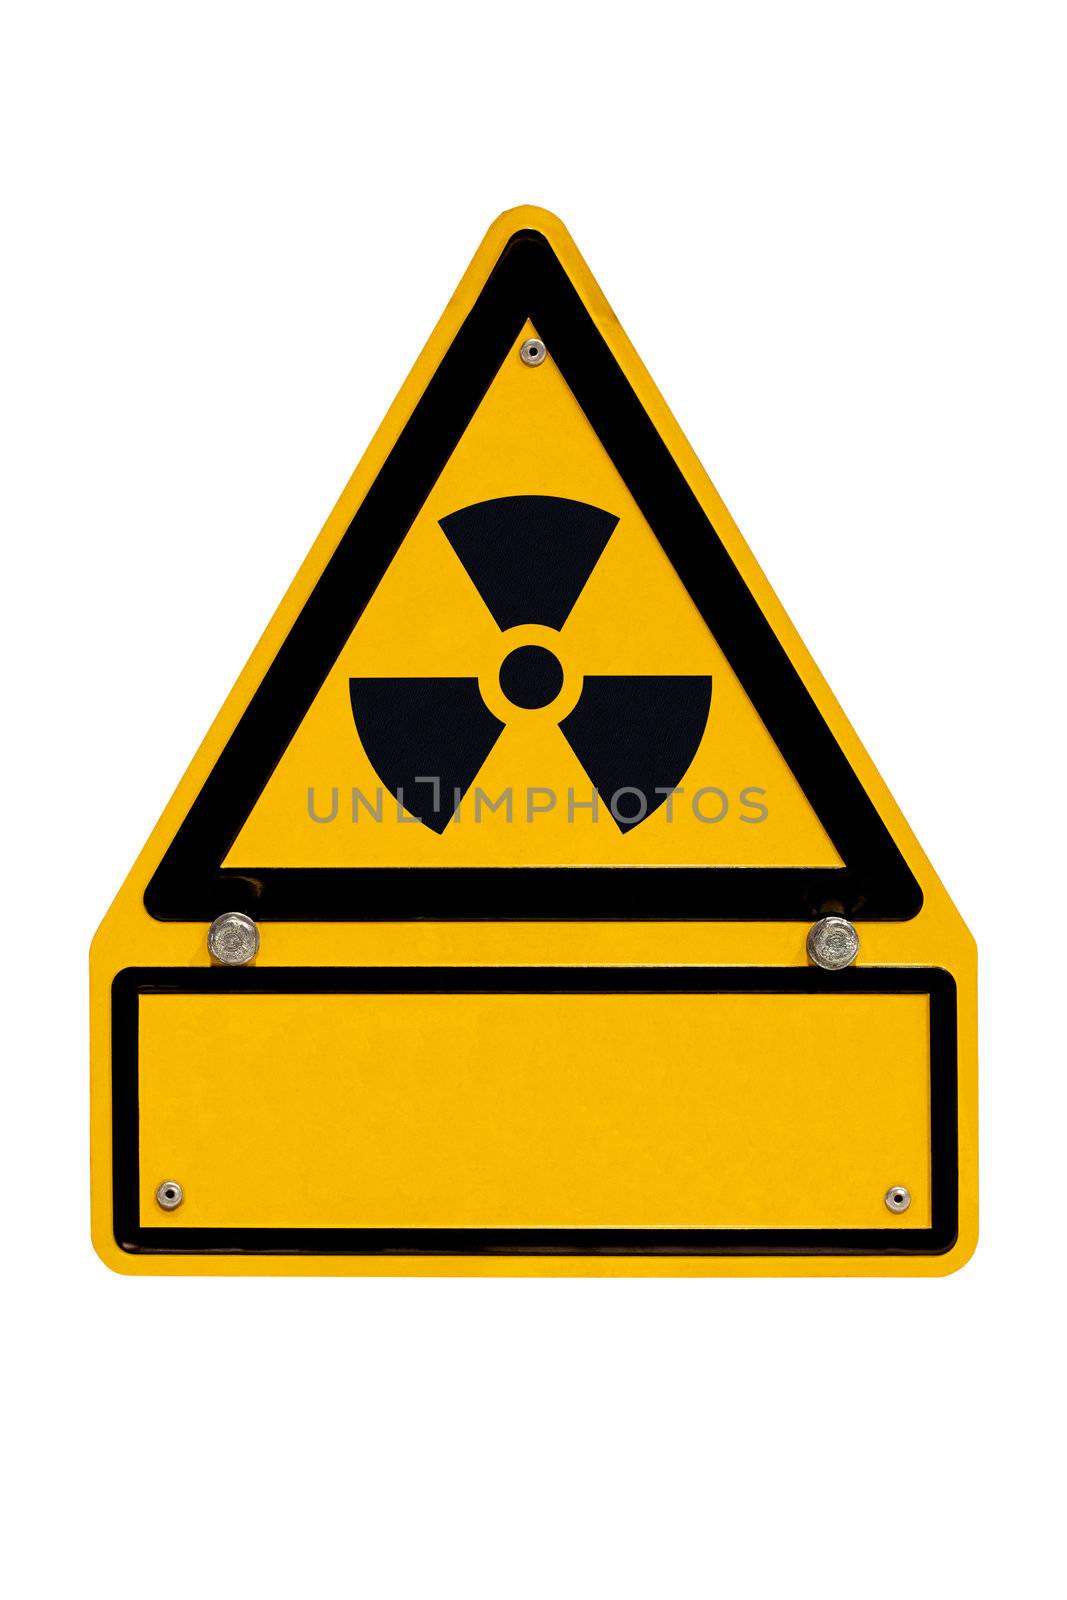 Radioactive Sign with copyspace on white by PiLens